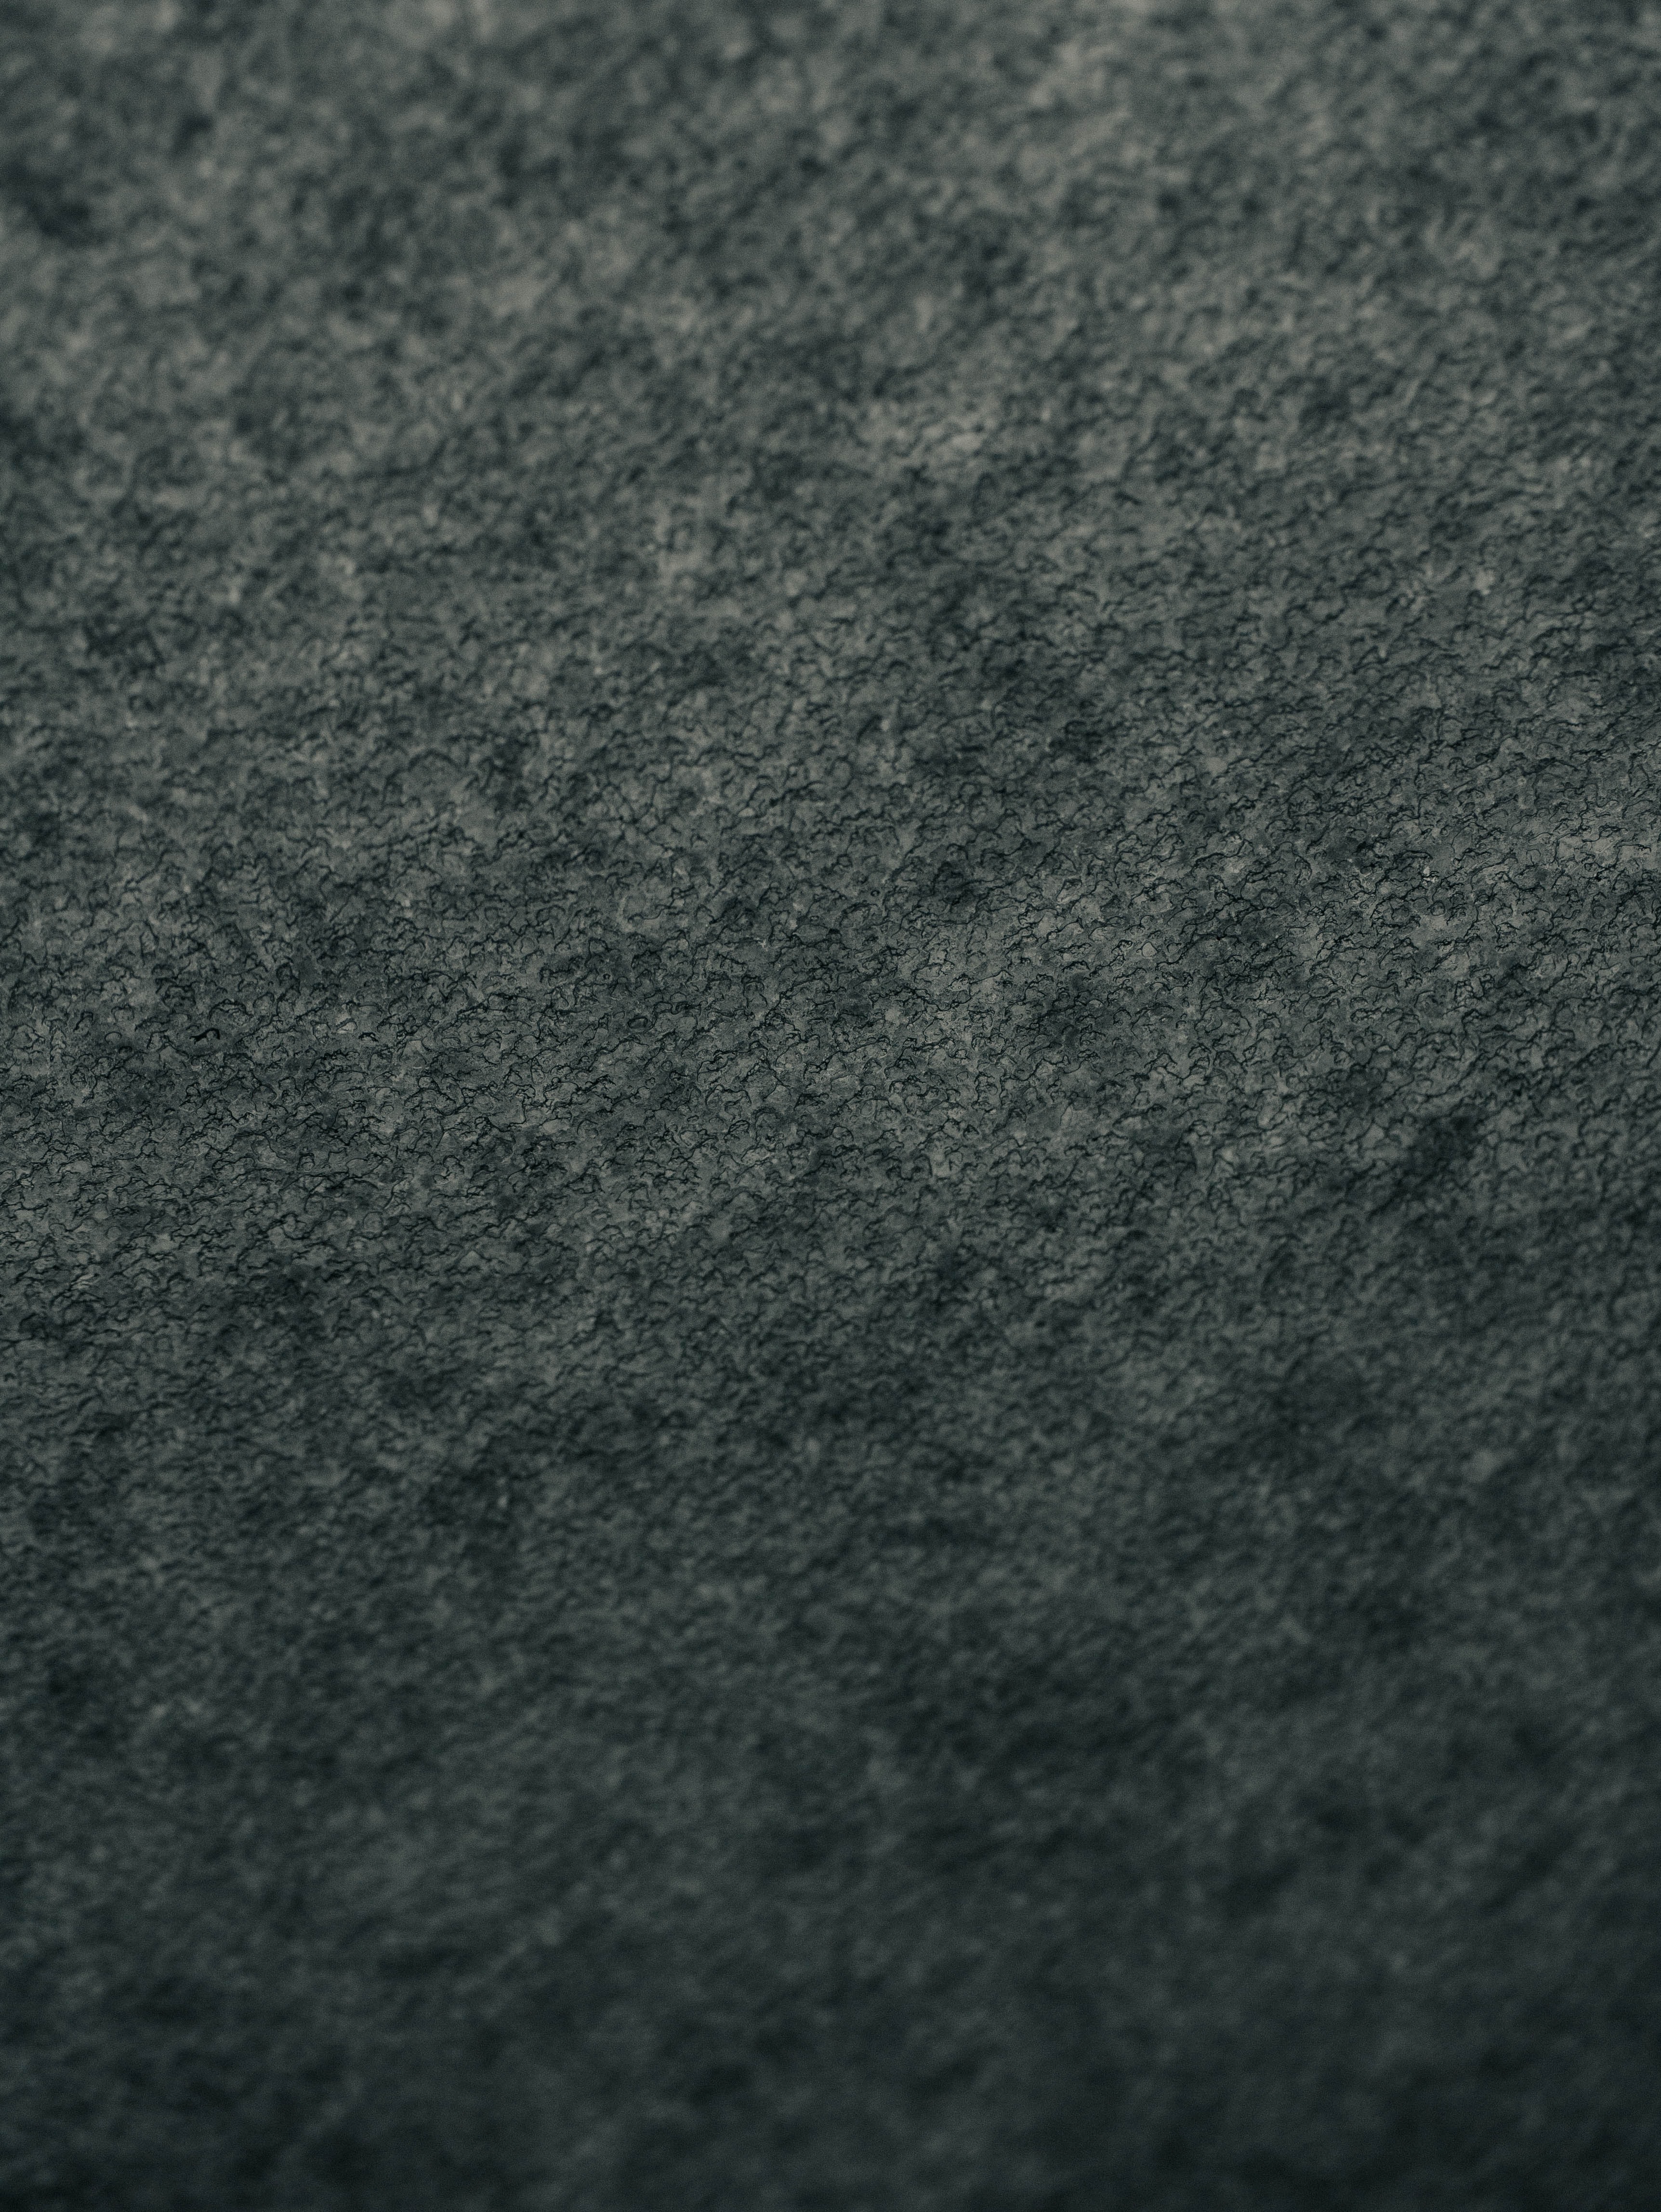 surface, texture, textures, relief, grey, rough, rugged images